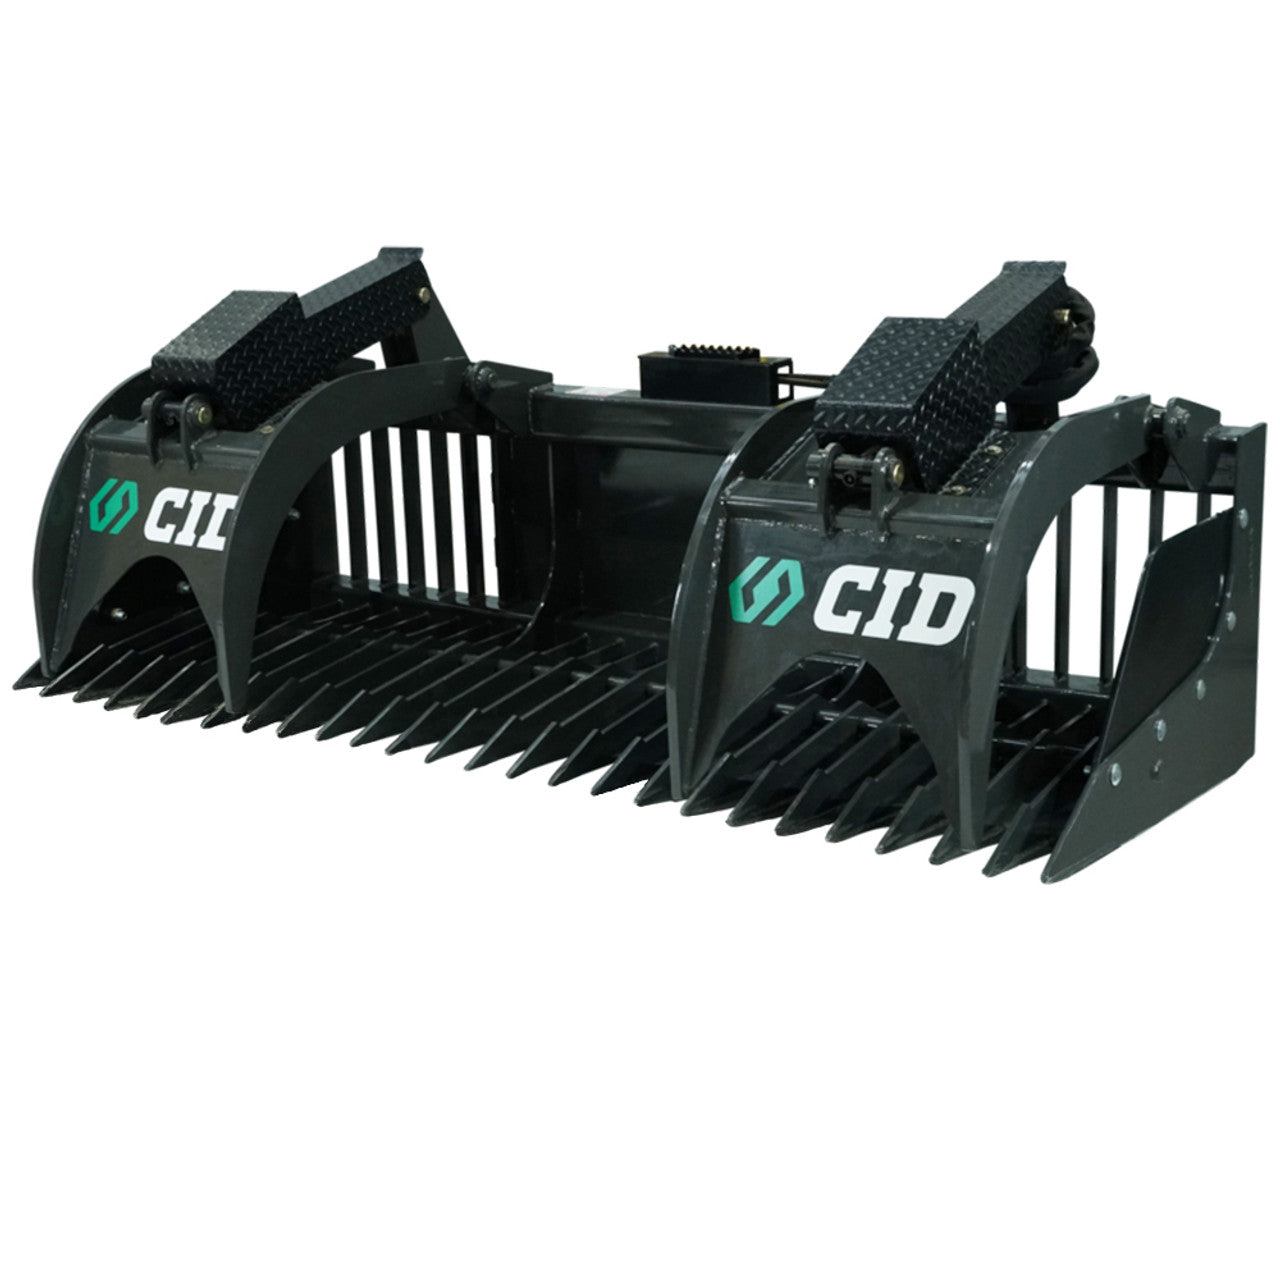 CID 66", 72", 78", 81" & 84" X-TREME DUTY ROCK GRAPPLE ATTACHMENT FOR SKID STEER